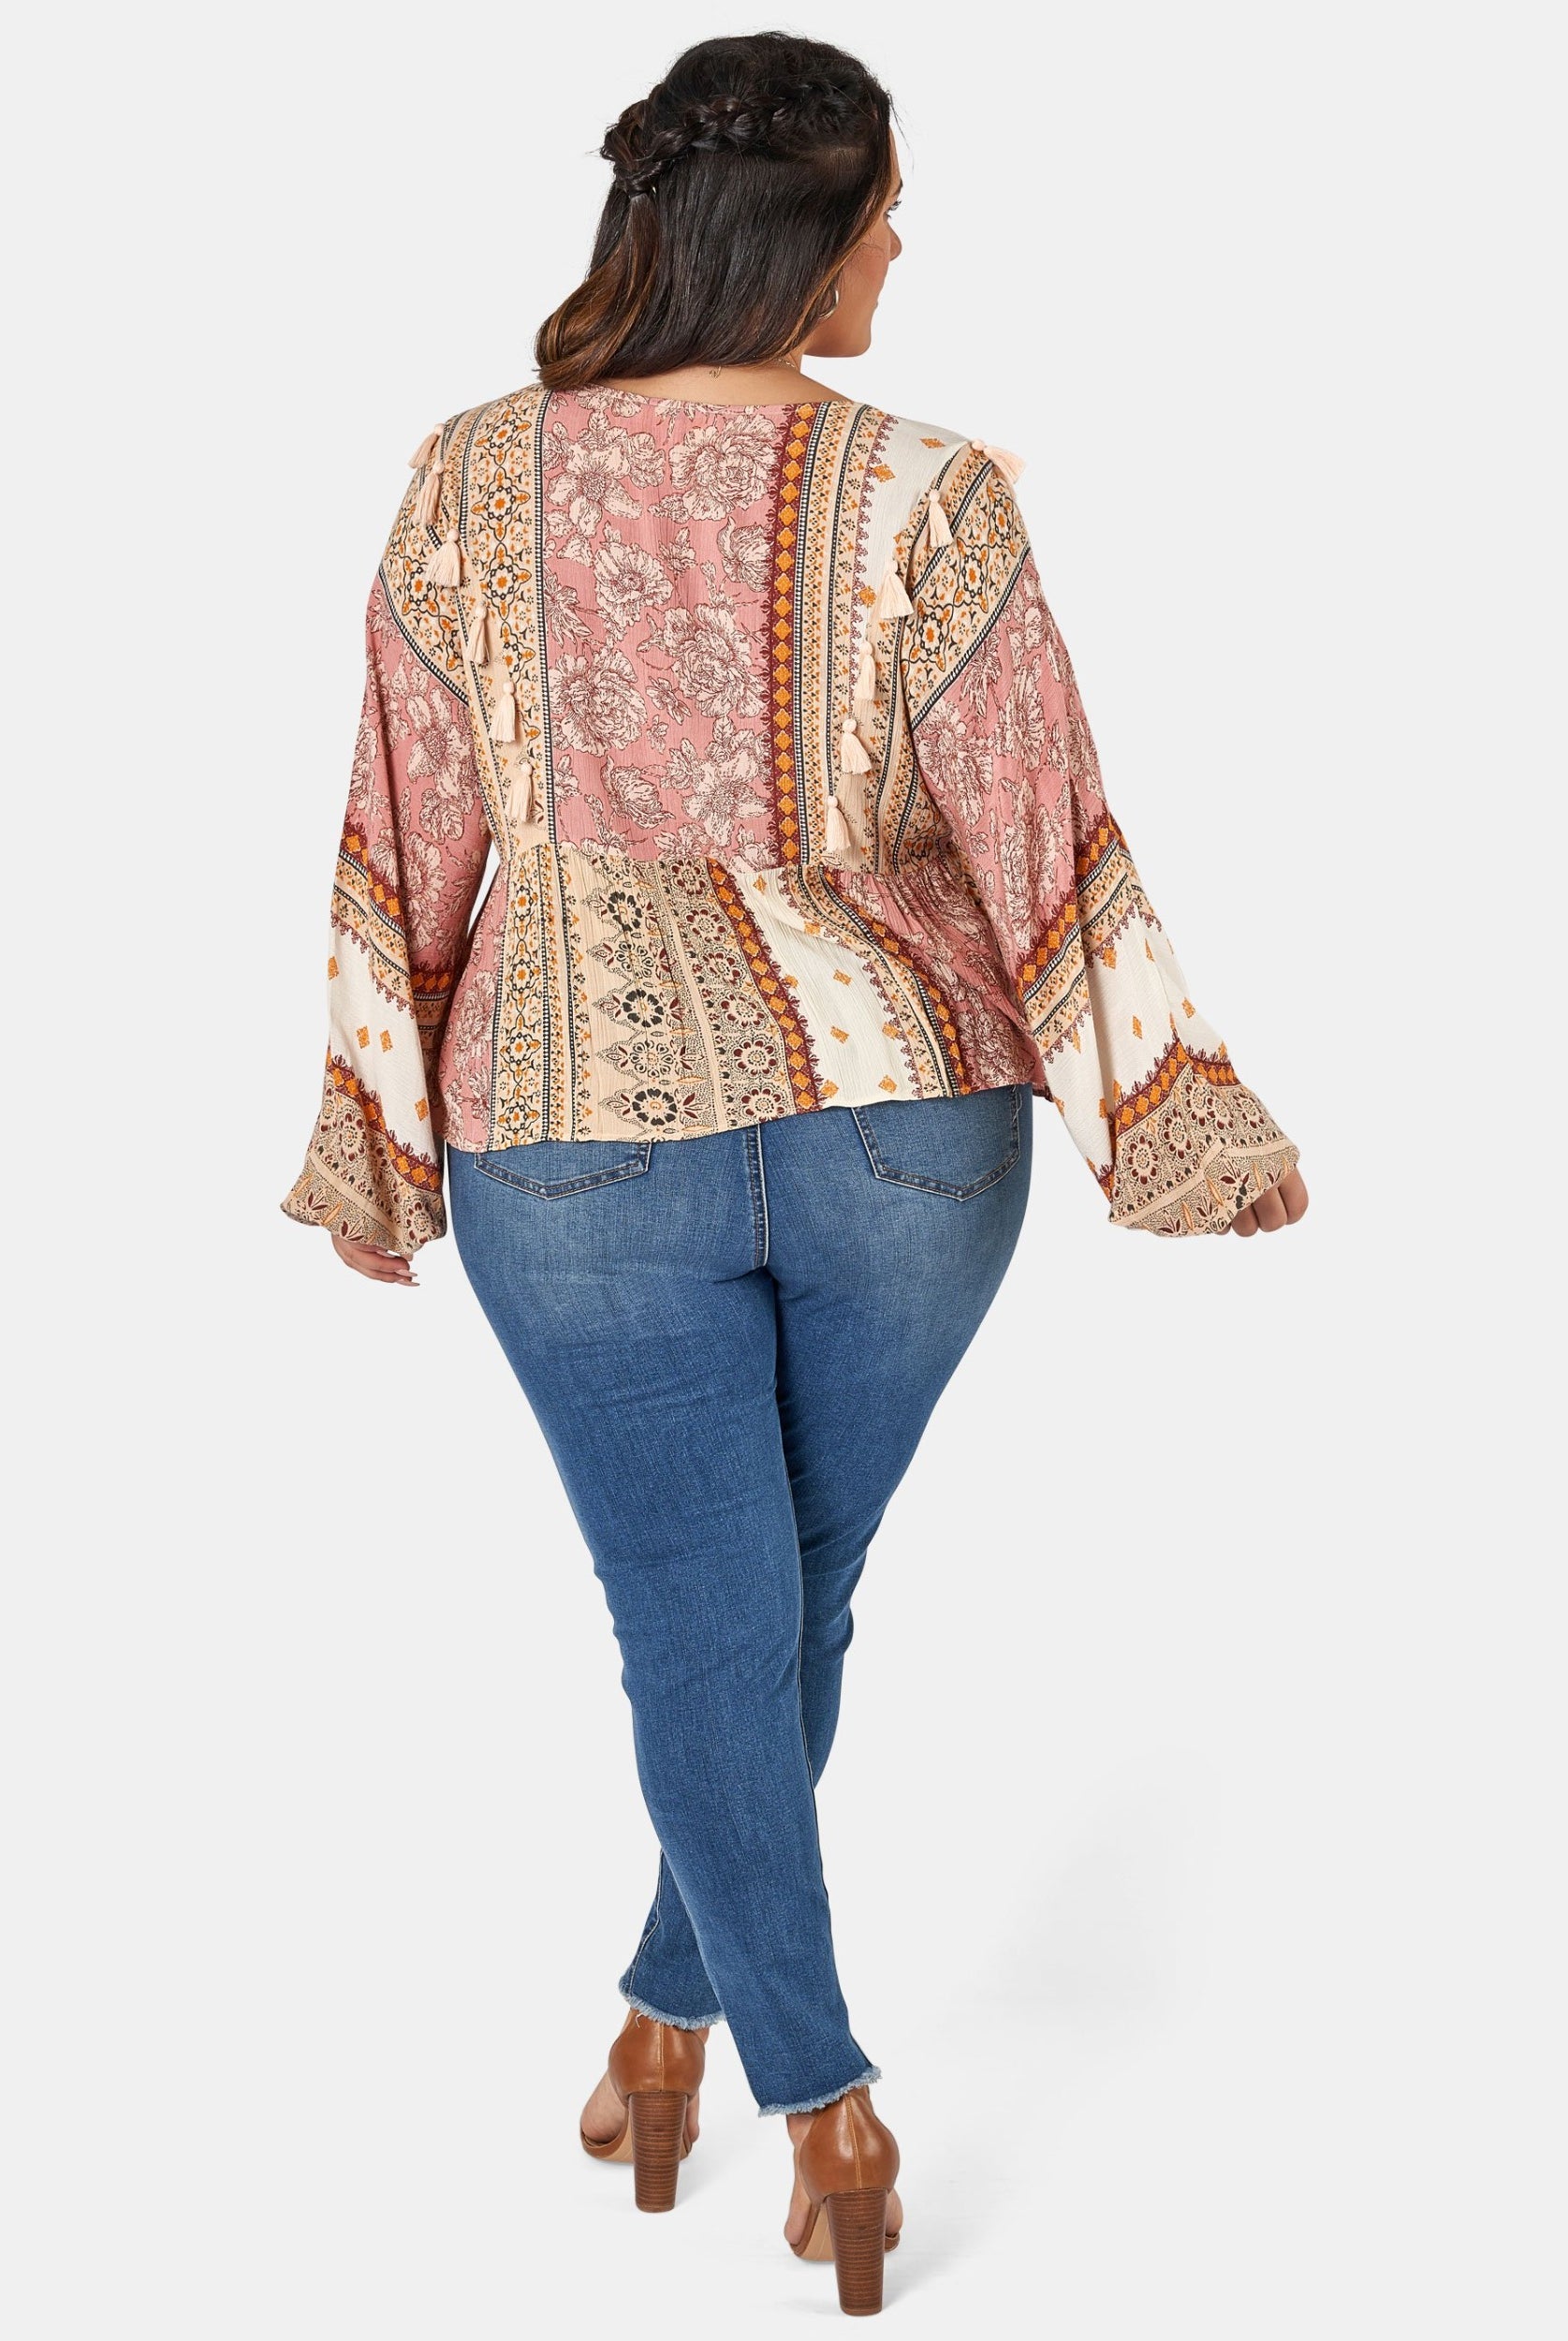 Woman wearing printed boho blouse with jeans